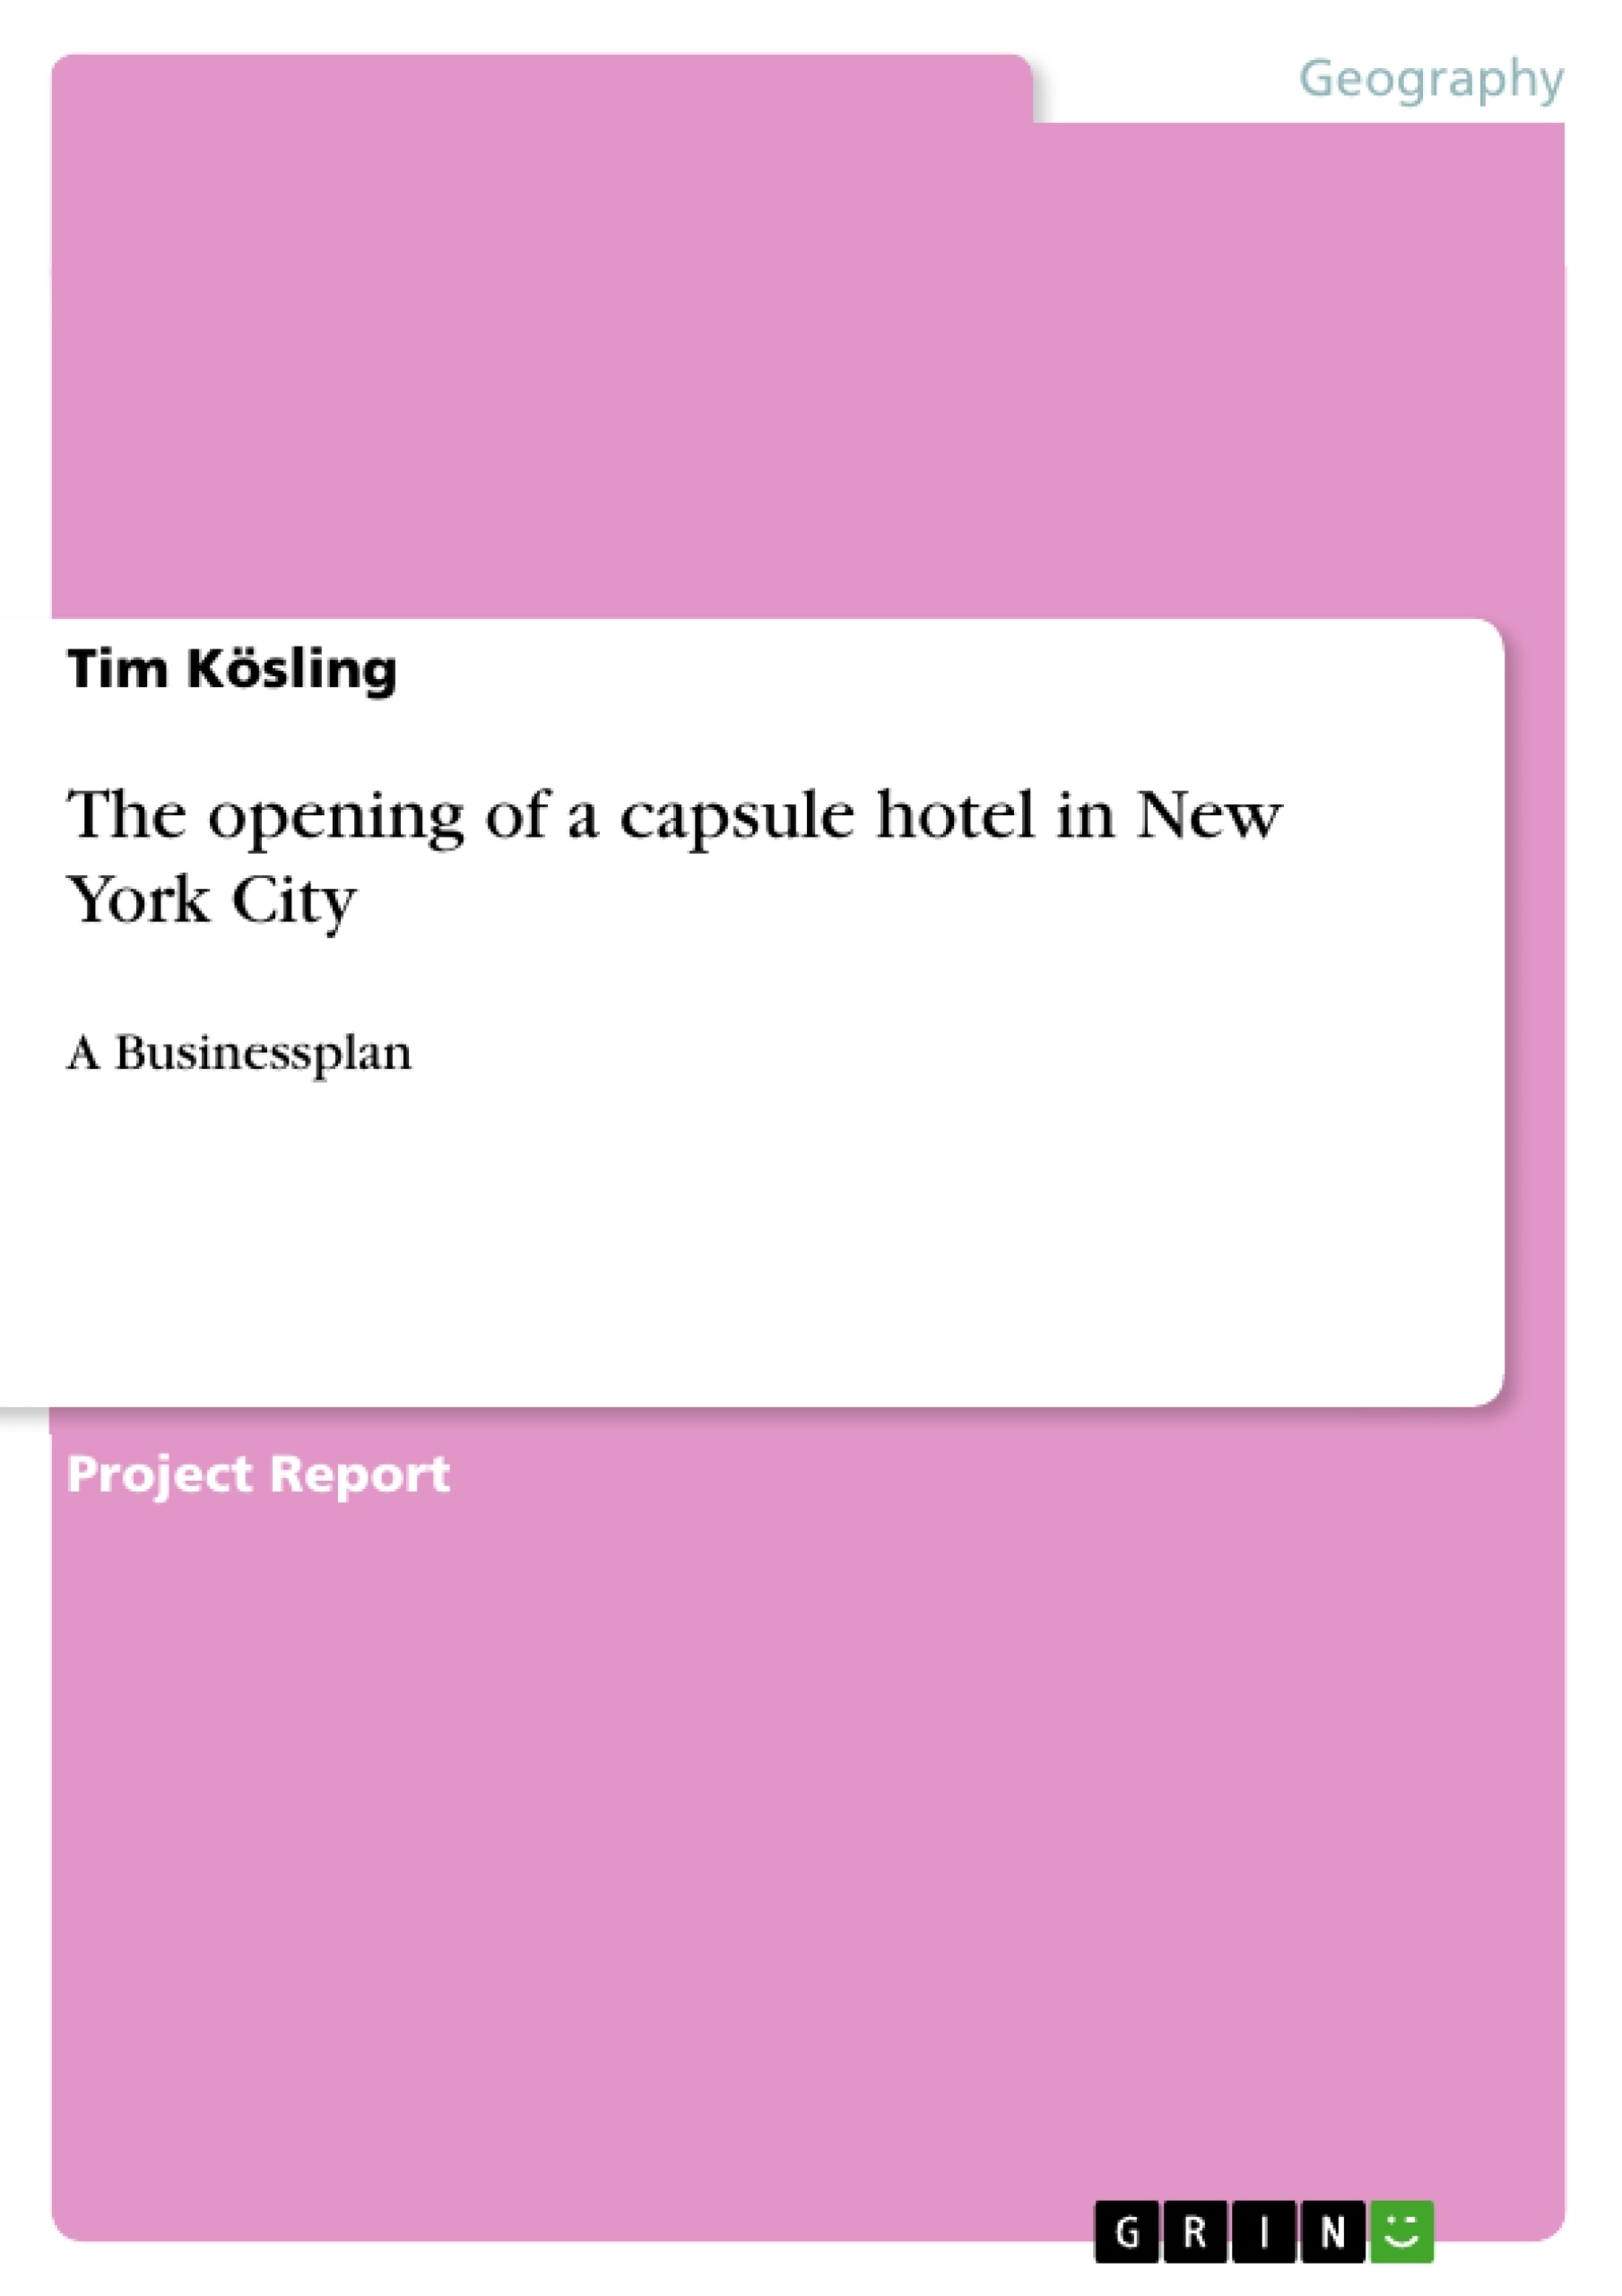 Title: The opening of a capsule hotel in New York City